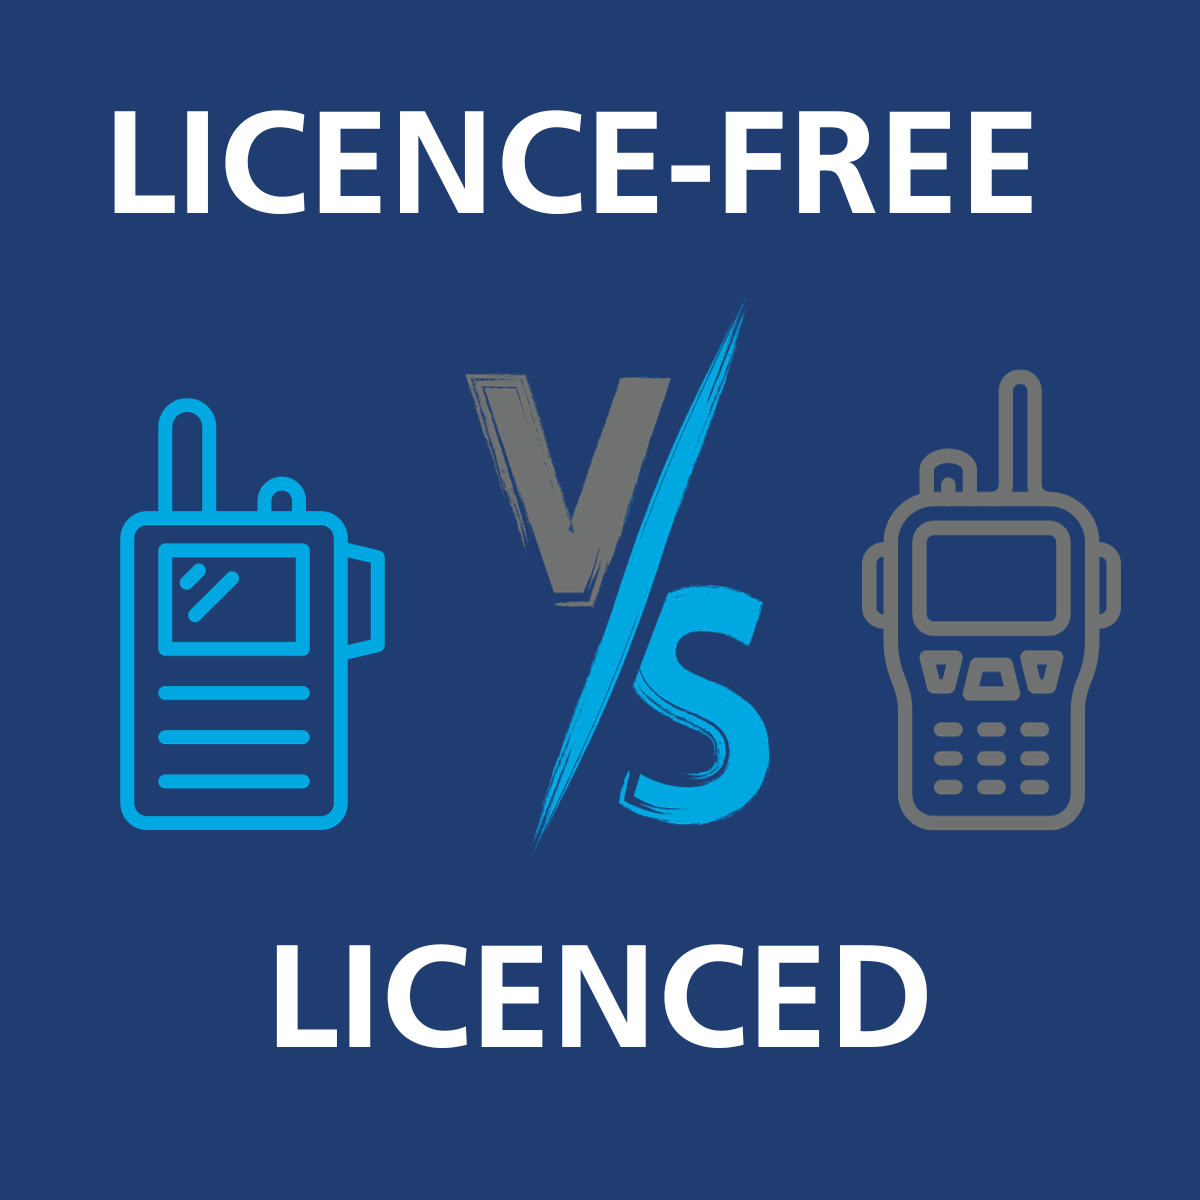 Licence-Free v Licenced Radios: Which Device Type Should You Use?